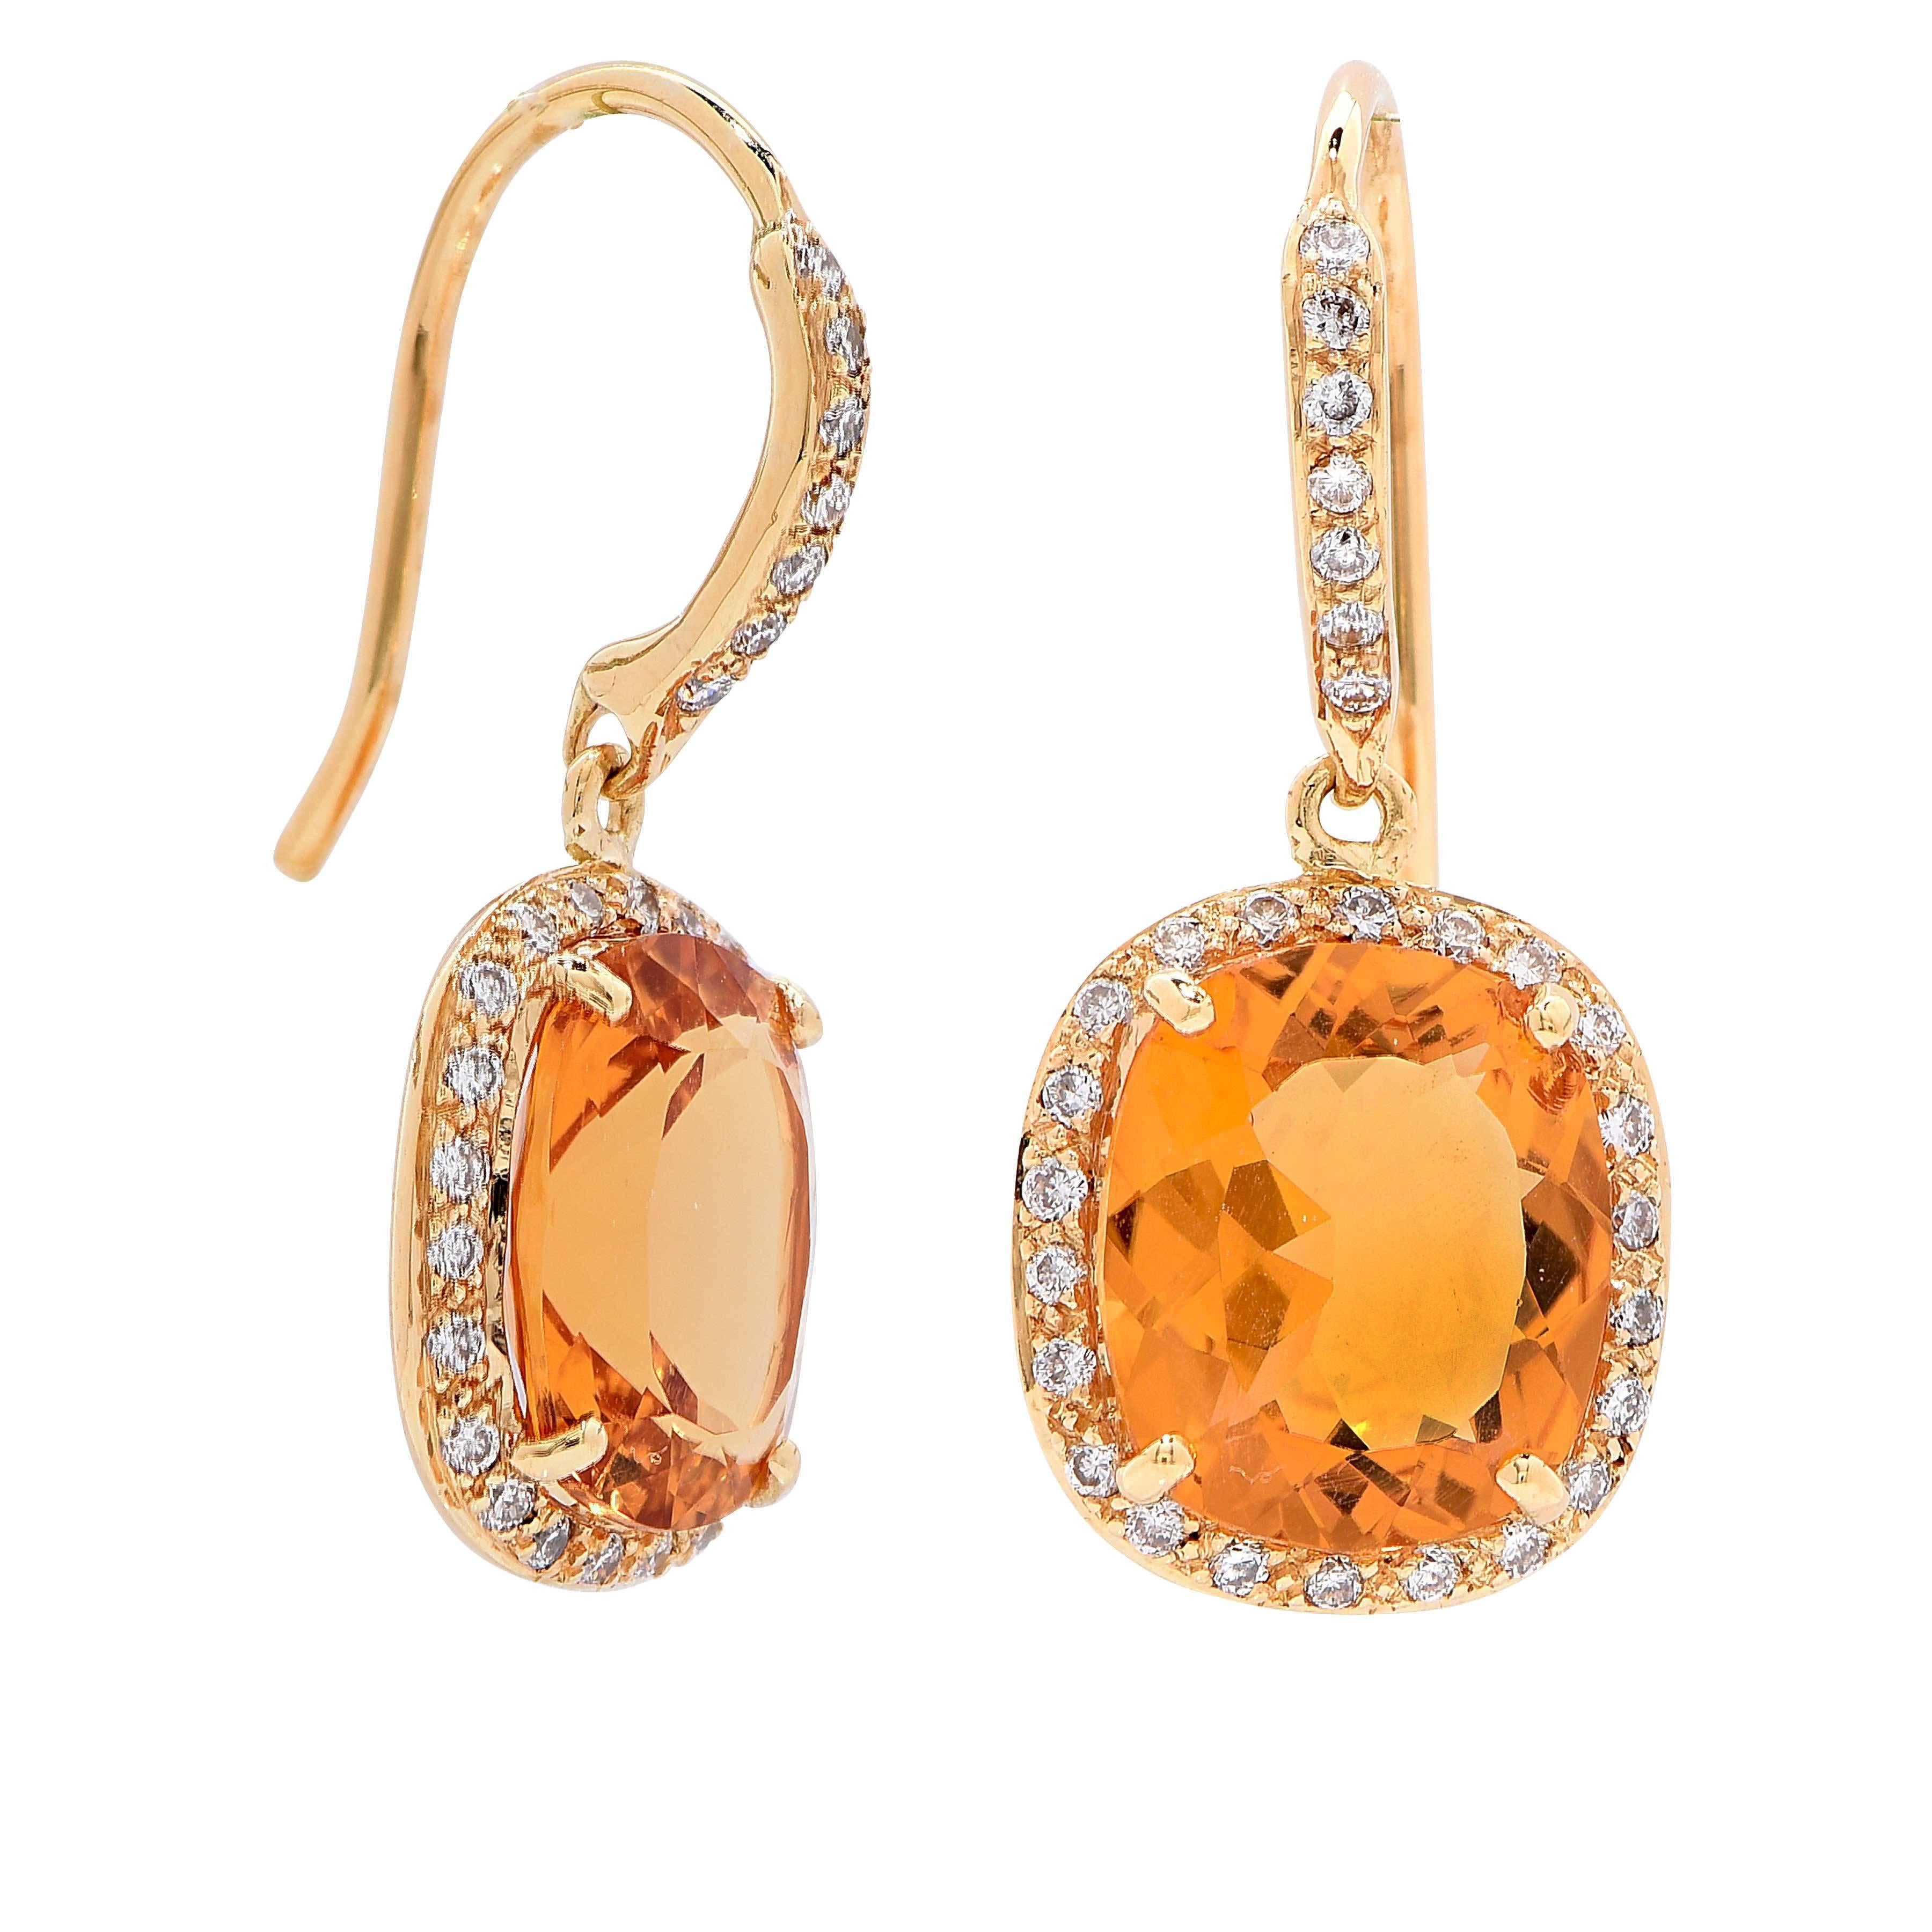 Citrine and diamond 18 karat yellow gold earrings featuring two cushion cut natural citrines with an estimated total weight of 6 carats surrounded by 58 round cut diamonds with an estimated total weight of .32 carat.

Metal Type: 18 Kt Yellow